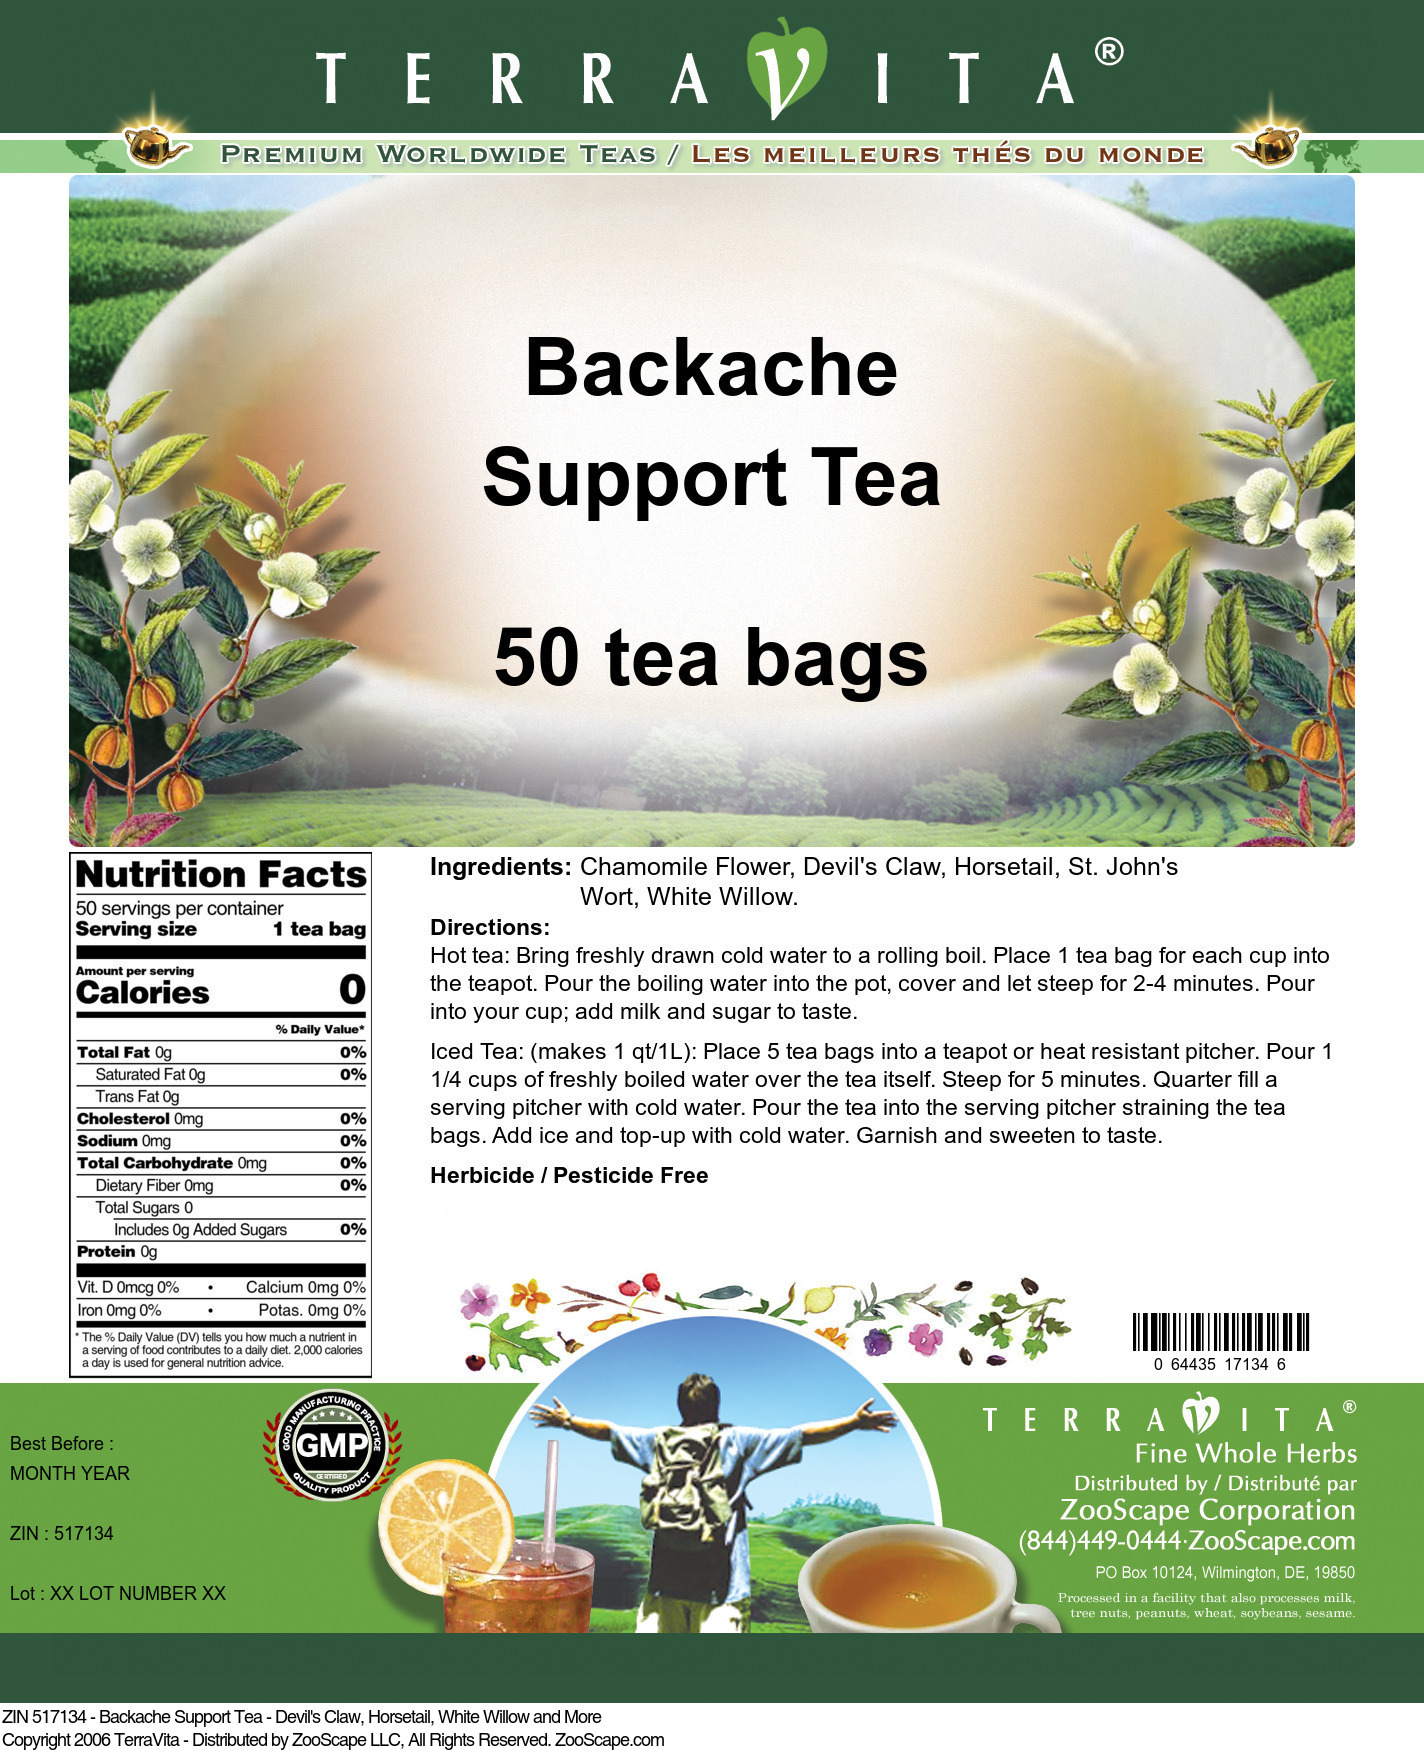 Backache Support Tea - Devil's Claw, Horsetail, White Willow and More - Label